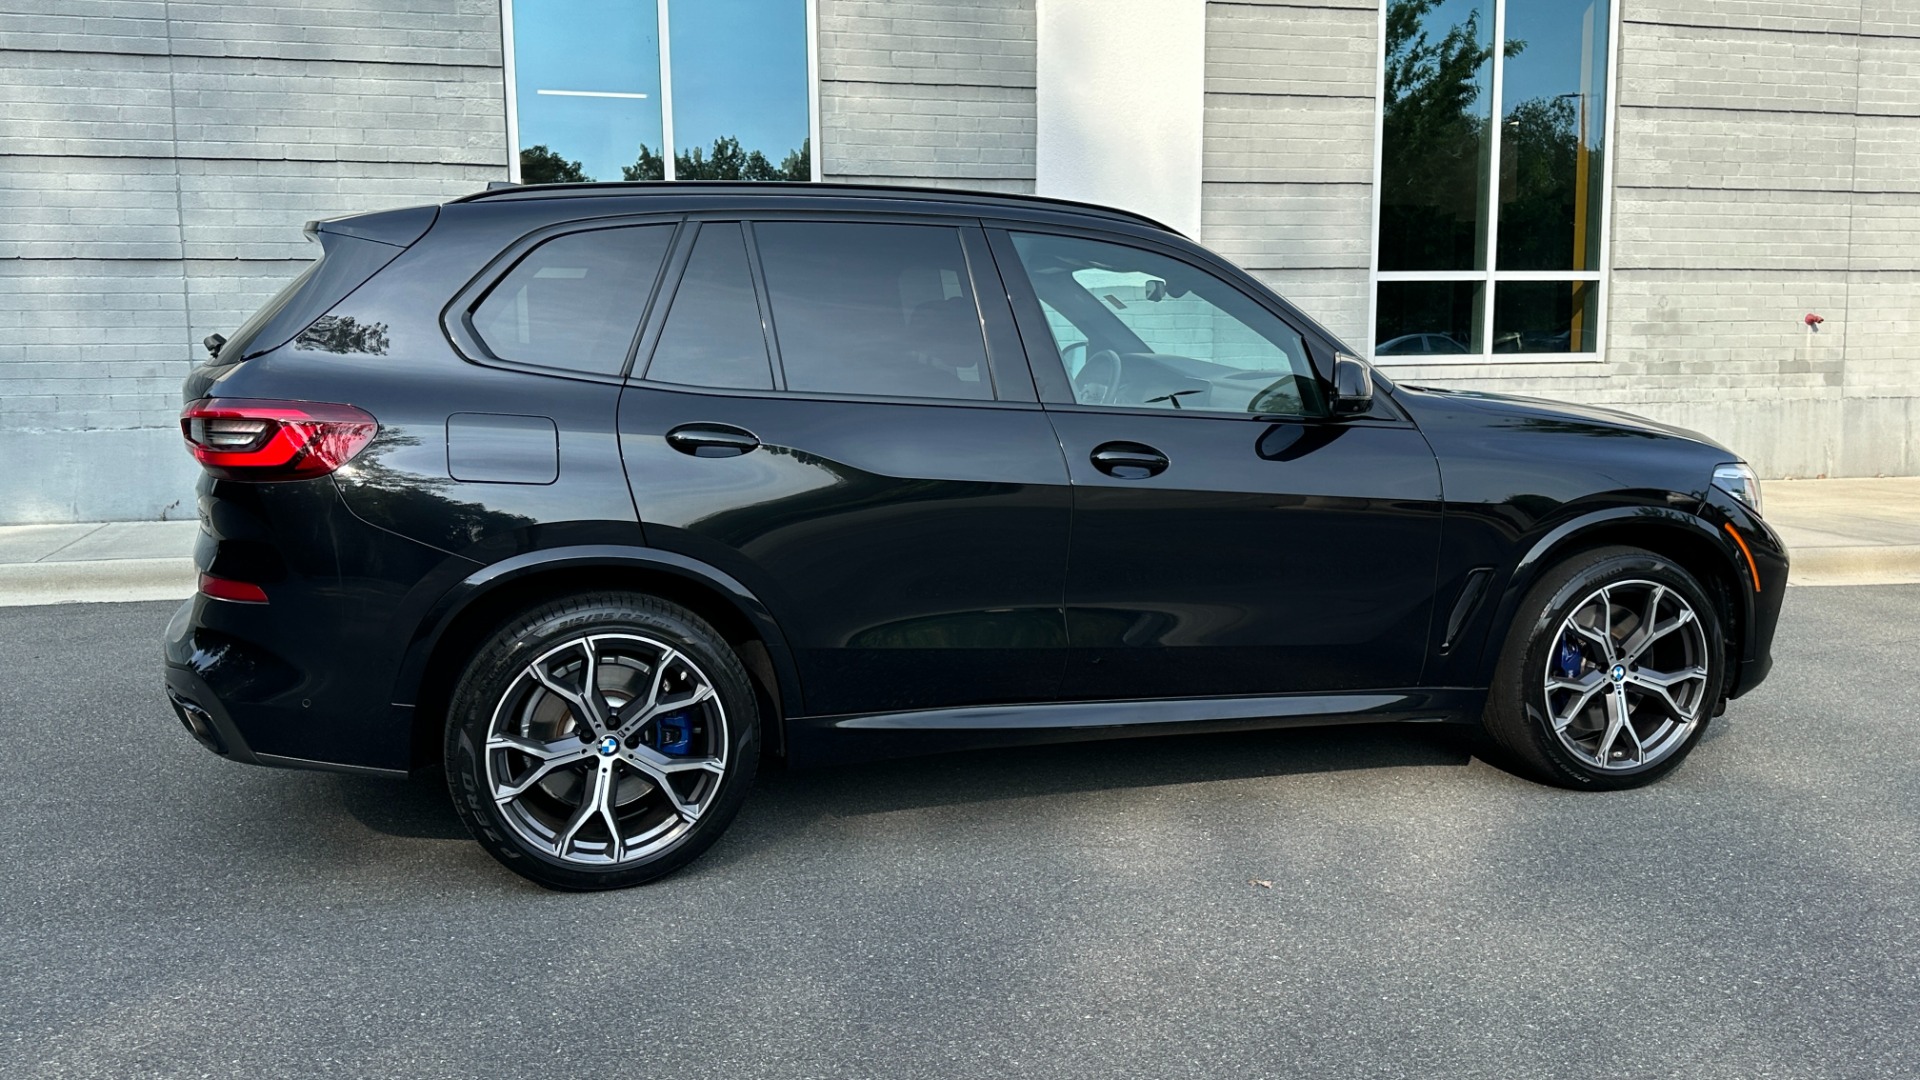 Used 2020 BMW X5 M50i / PREMIUM / TRAILER HITCH / BLACK TRIM / PARKING ASSIST for sale $54,995 at Formula Imports in Charlotte NC 28227 6